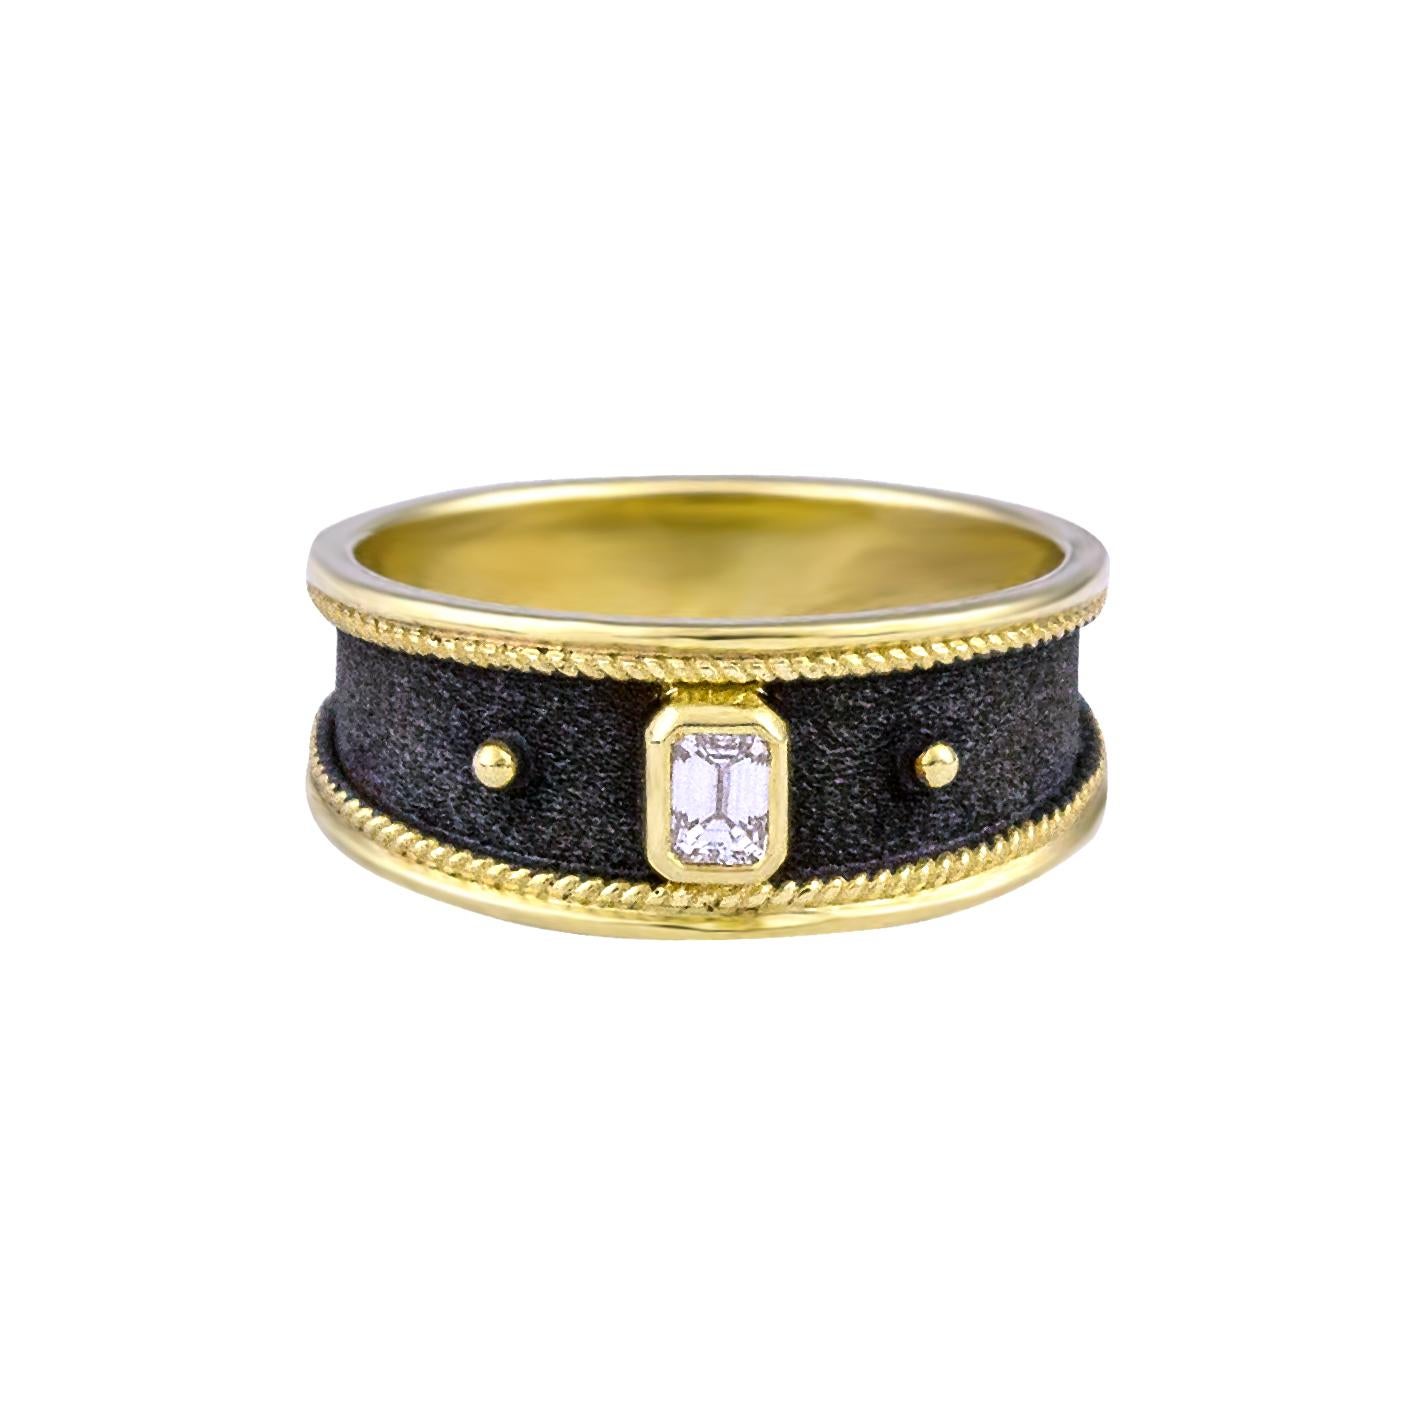 S.Georgios design ring handmade from solid 18 Carat Yellow Gold all custom-made. This graduated ring is microscopically decorated with gold wires. Granulated details contrast with Byzantine velvet background finished with Black Rhodium. The stunning